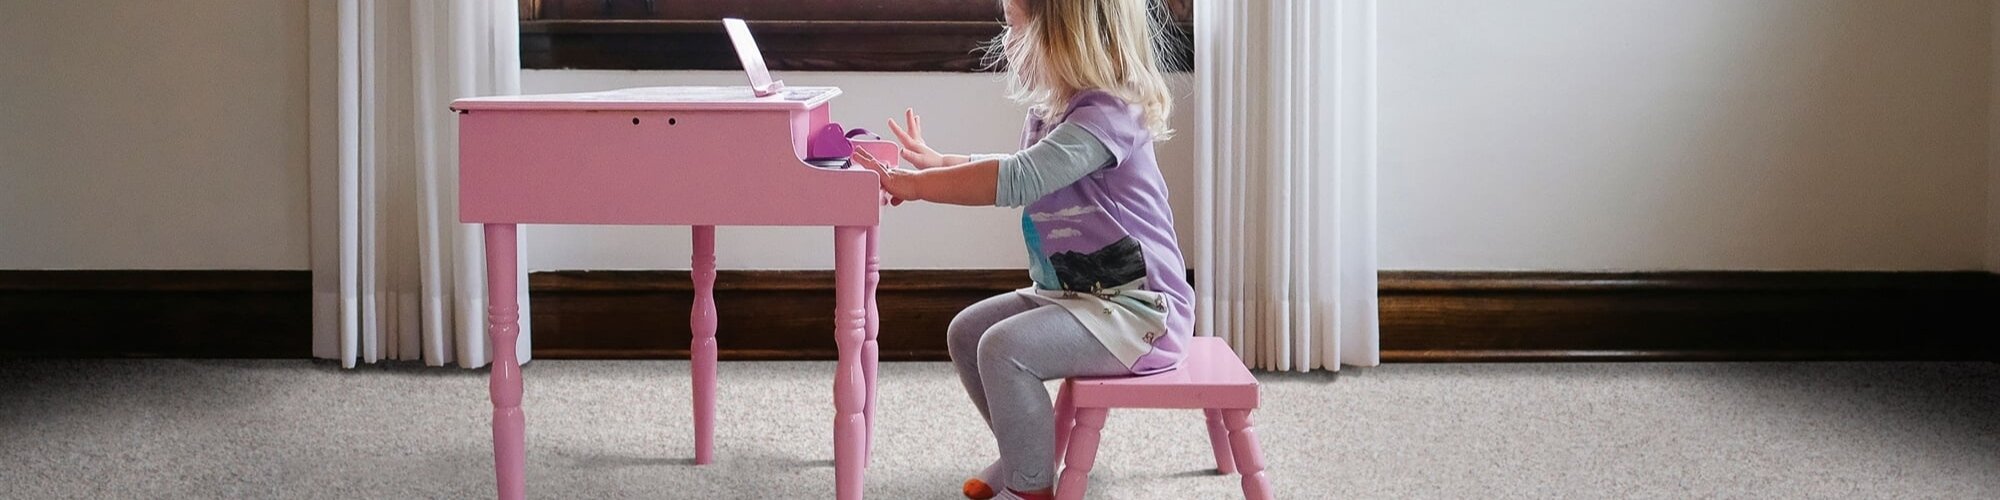 Toddler playing toy piano on SmartStrand Carpet